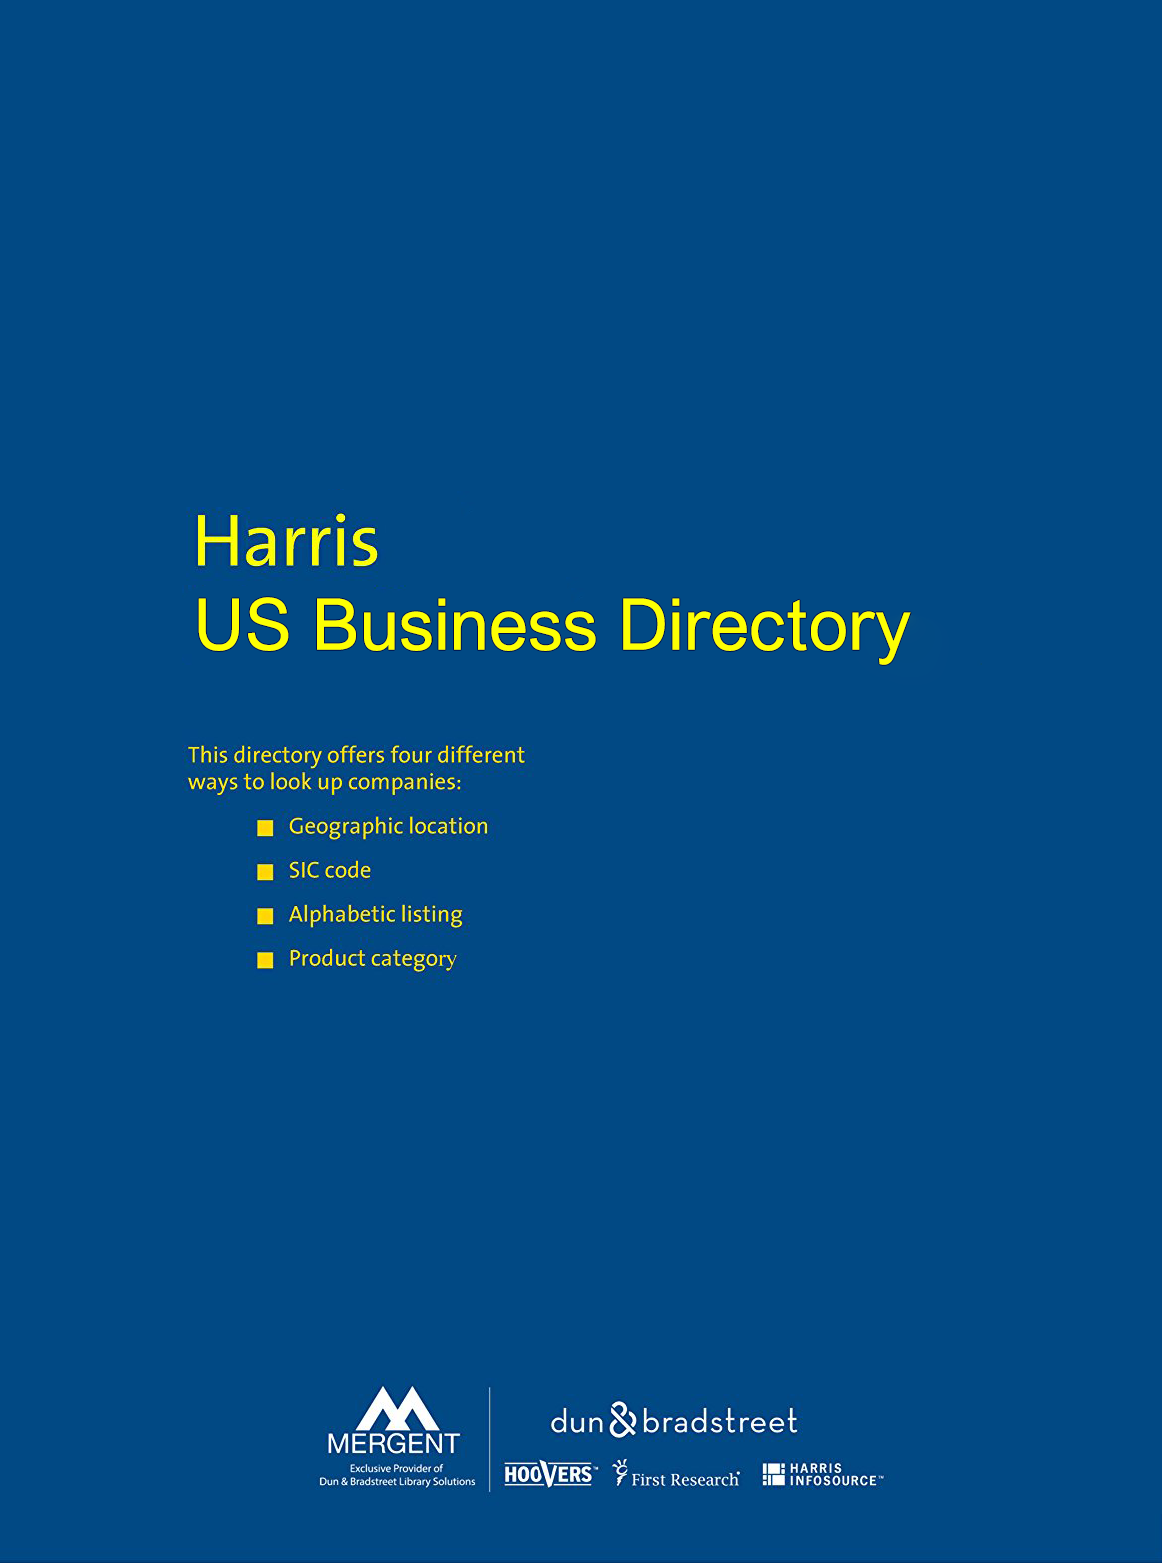 Harris Northern CA Business Directory and Buyer's Guide